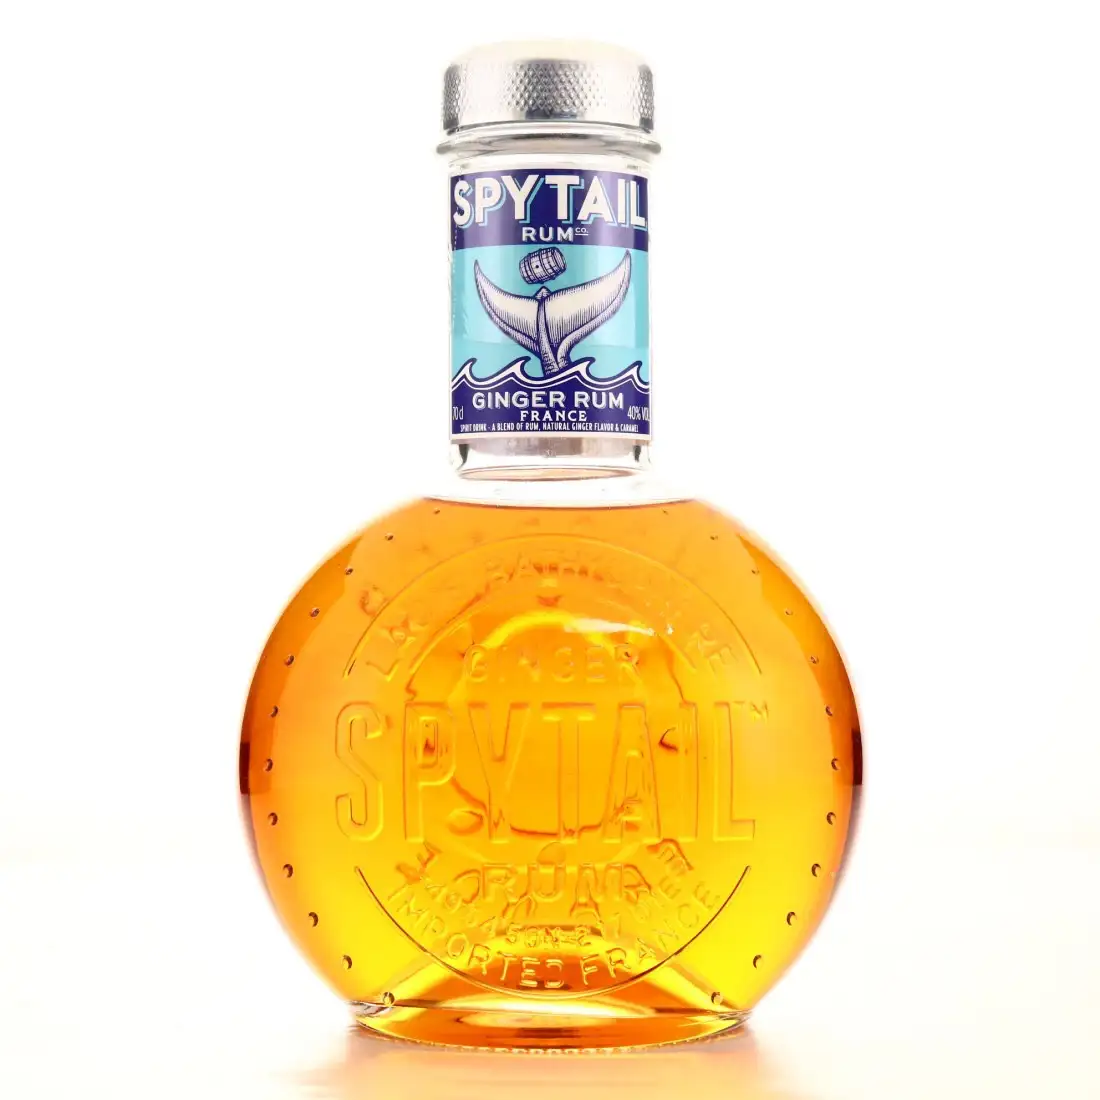 Image of the front of the bottle of the rum Spytail Ginger Rum